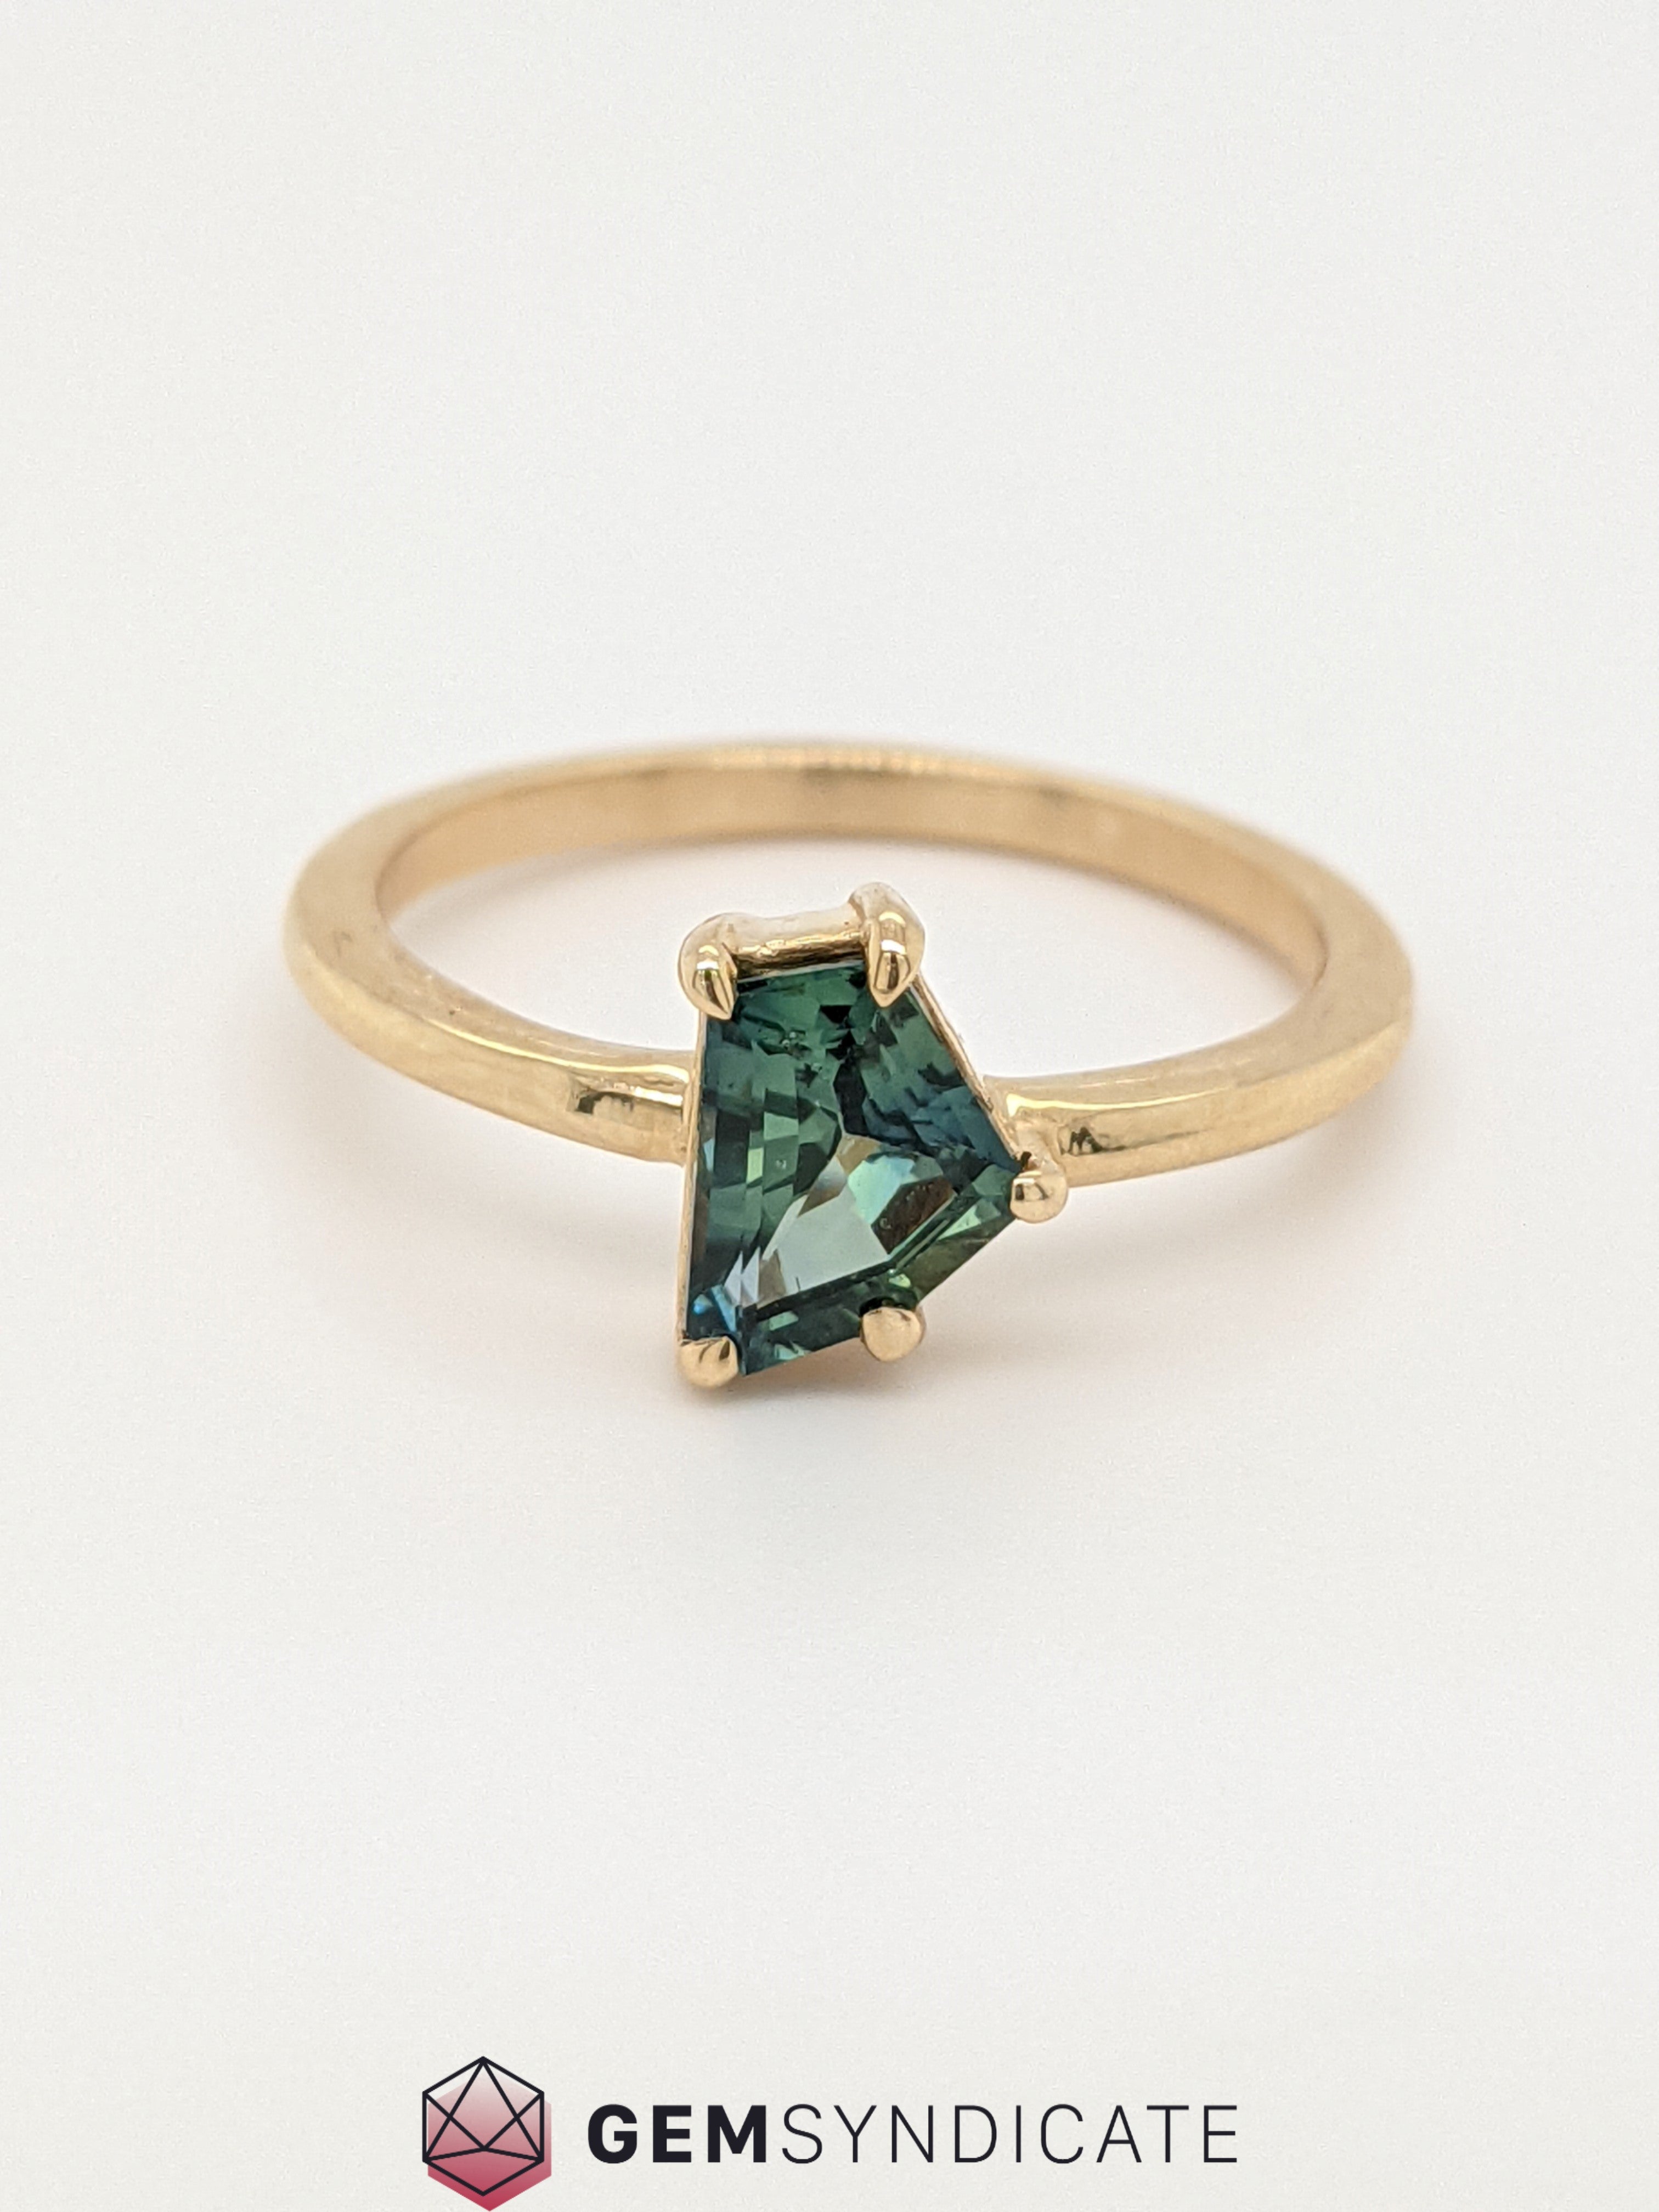 Exceptional Fancy Shape Teal Sapphire Ring in 14k Yellow Gold